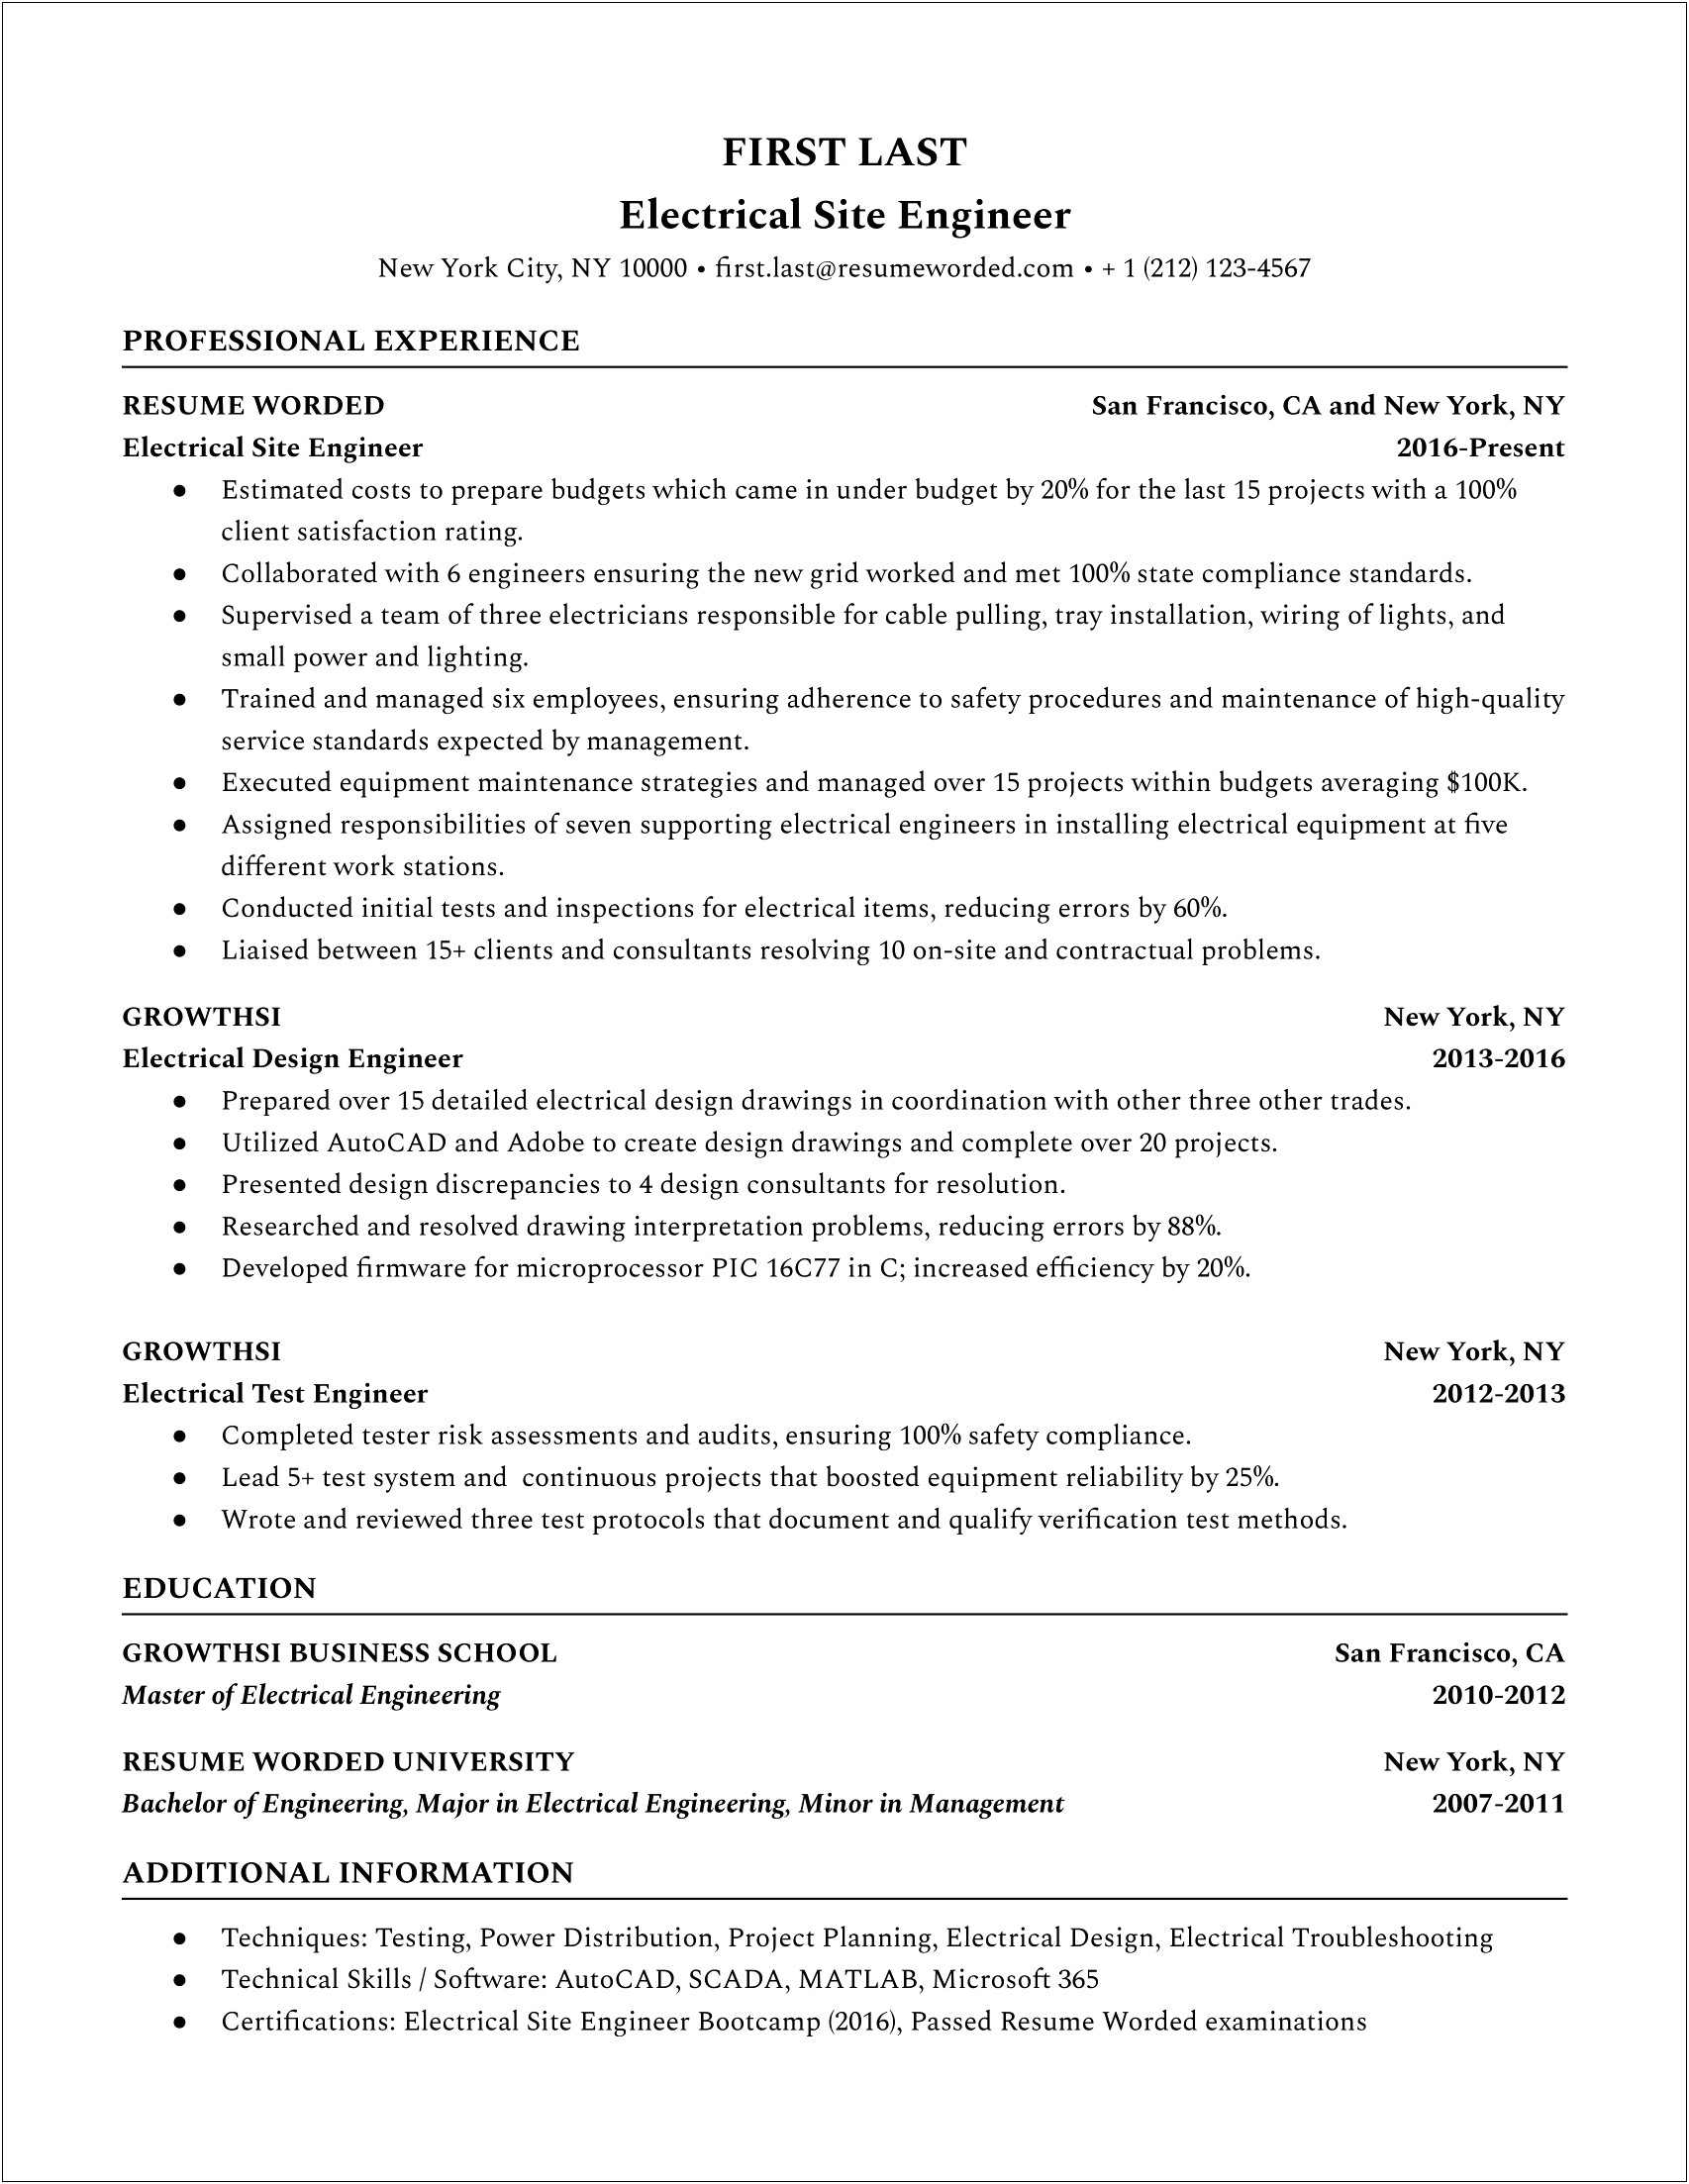 Sample Resume For Electrical Engineer Fresher Pdf